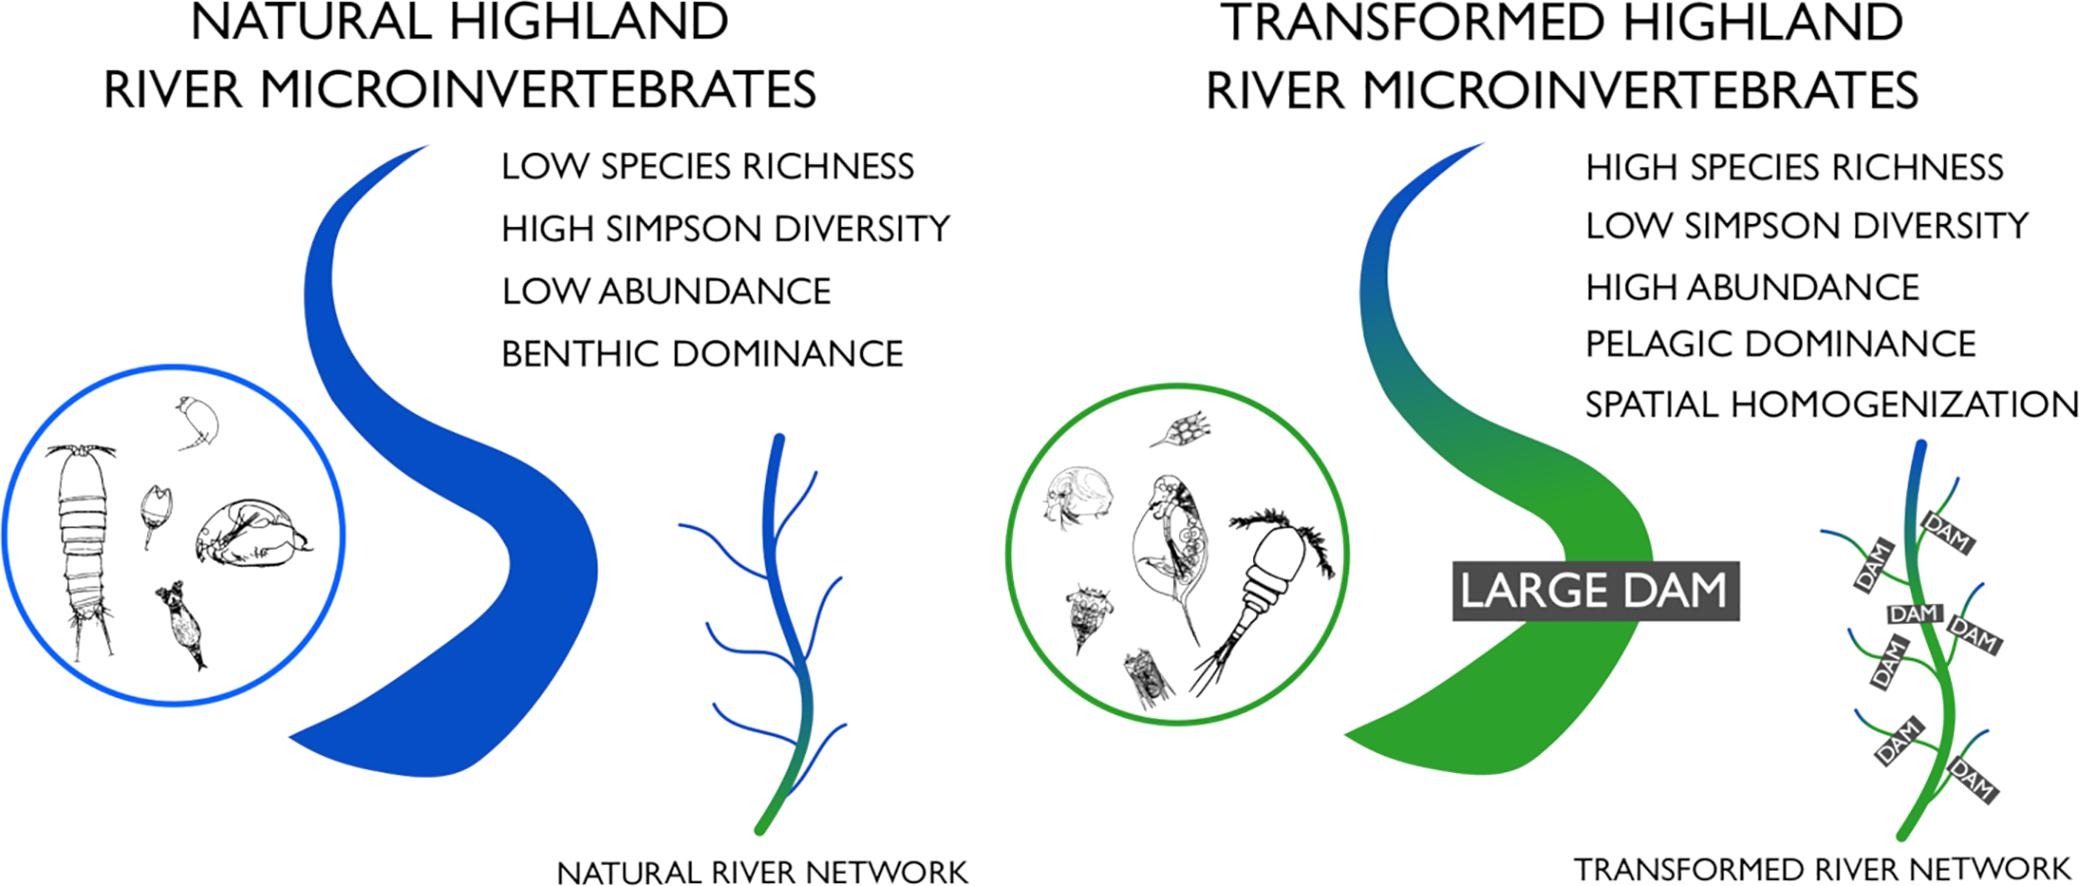 Hydro-modifications matter: Influence of vale transformation on microinvertebrate communities